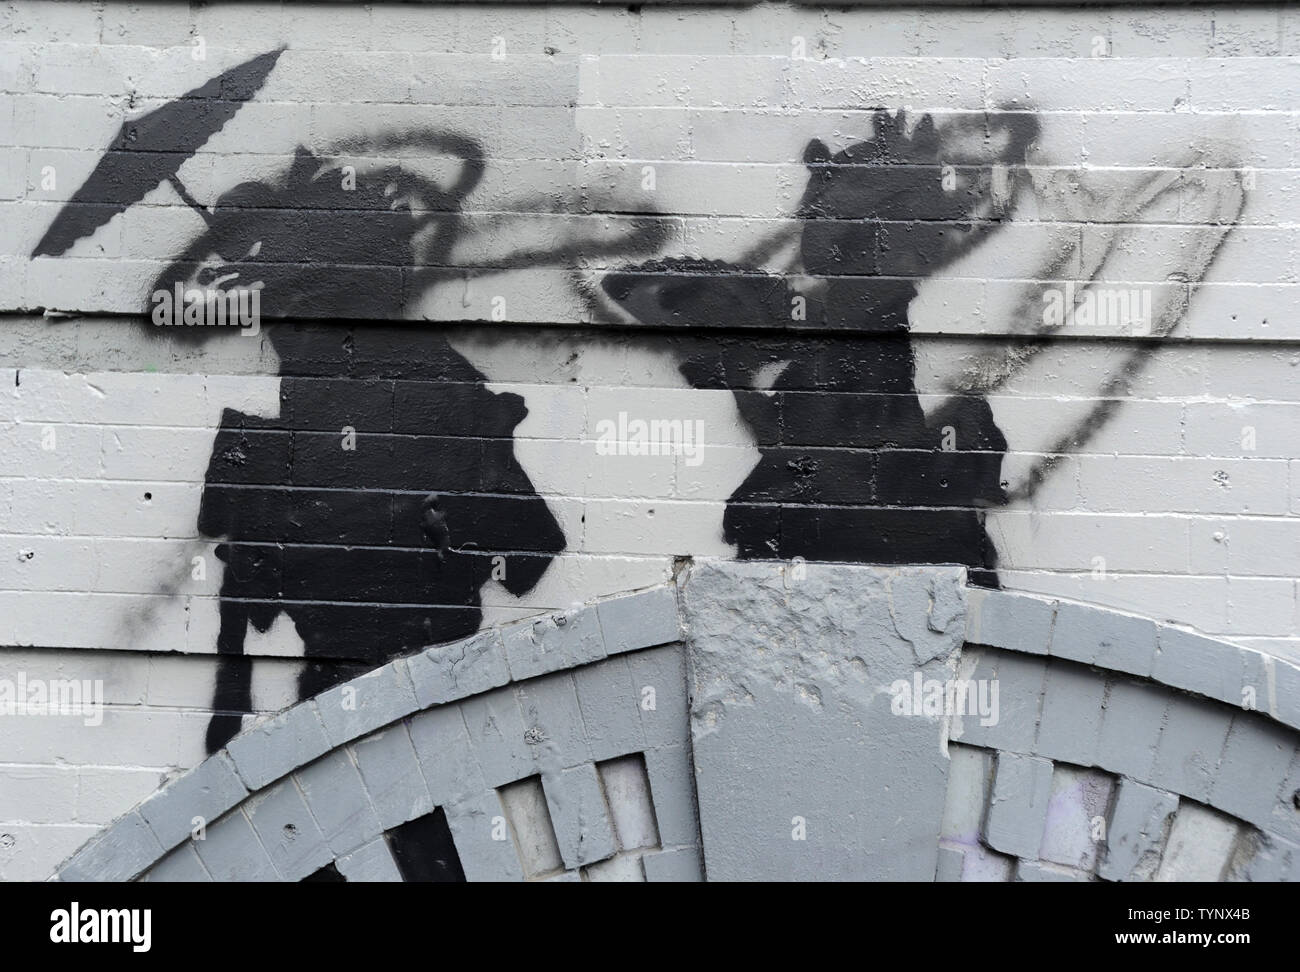 An art installation created by British street artist Banksy is seen in Williamsburg in New York City on October 17, 2013. Banksy is a pseudonymous England-based graffiti artist, political activist, film director, and painter. His satirical street art and subversive epigrams combine dark humor with graffiti done in a distinctive stenciling technique.    UPI/Dennis Van Tine Stock Photo